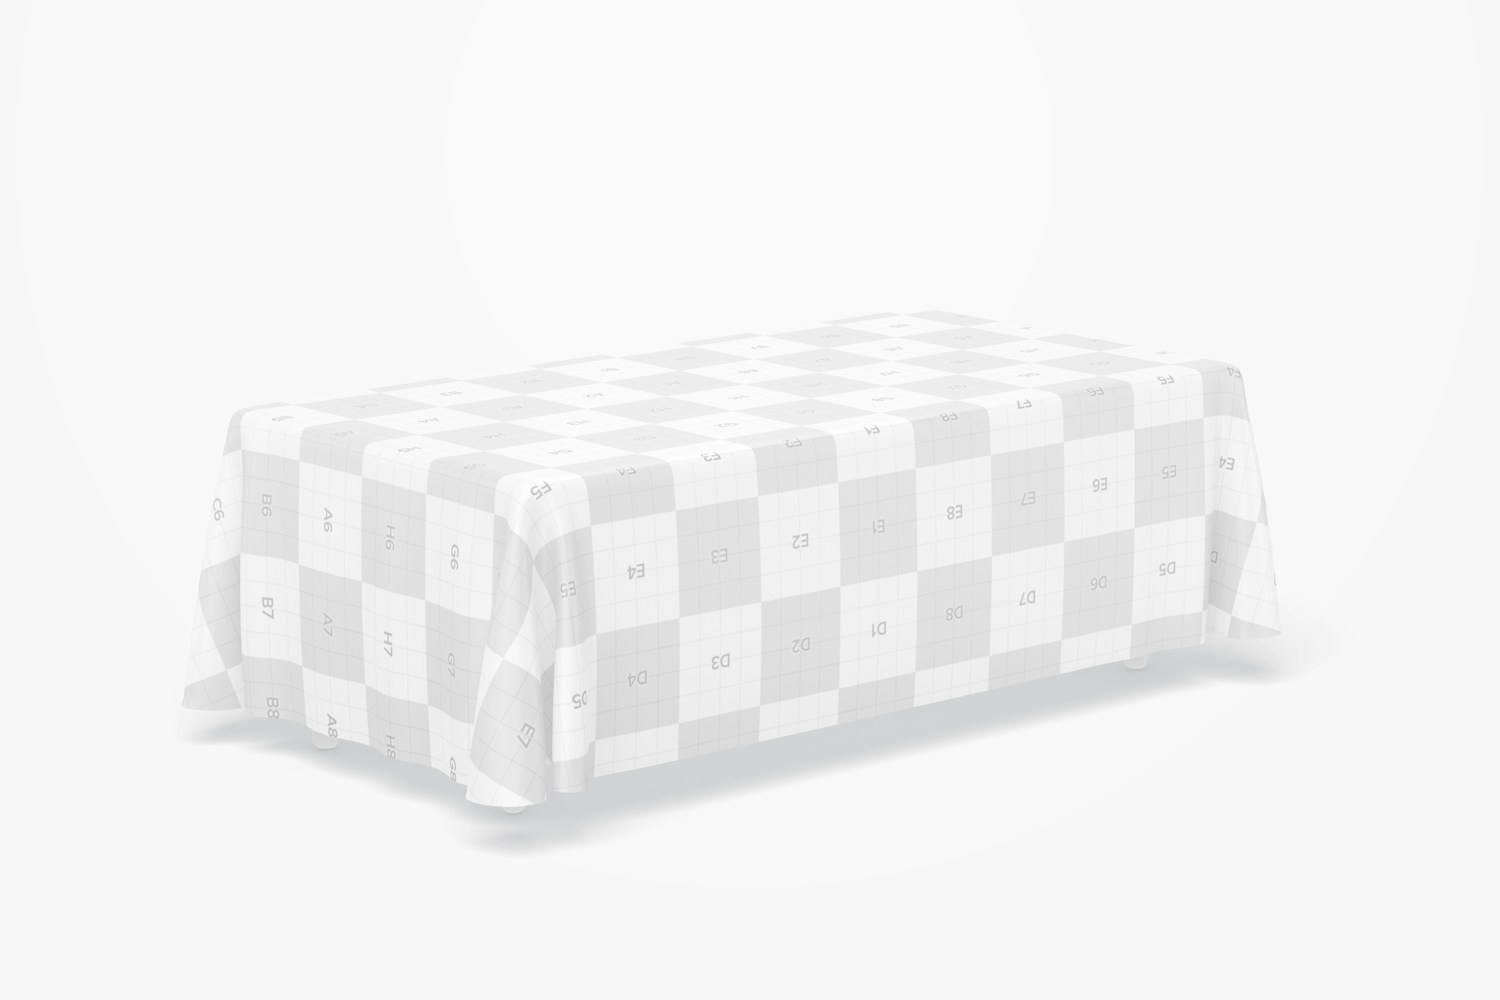 Tablecloth Mockup, Perspective